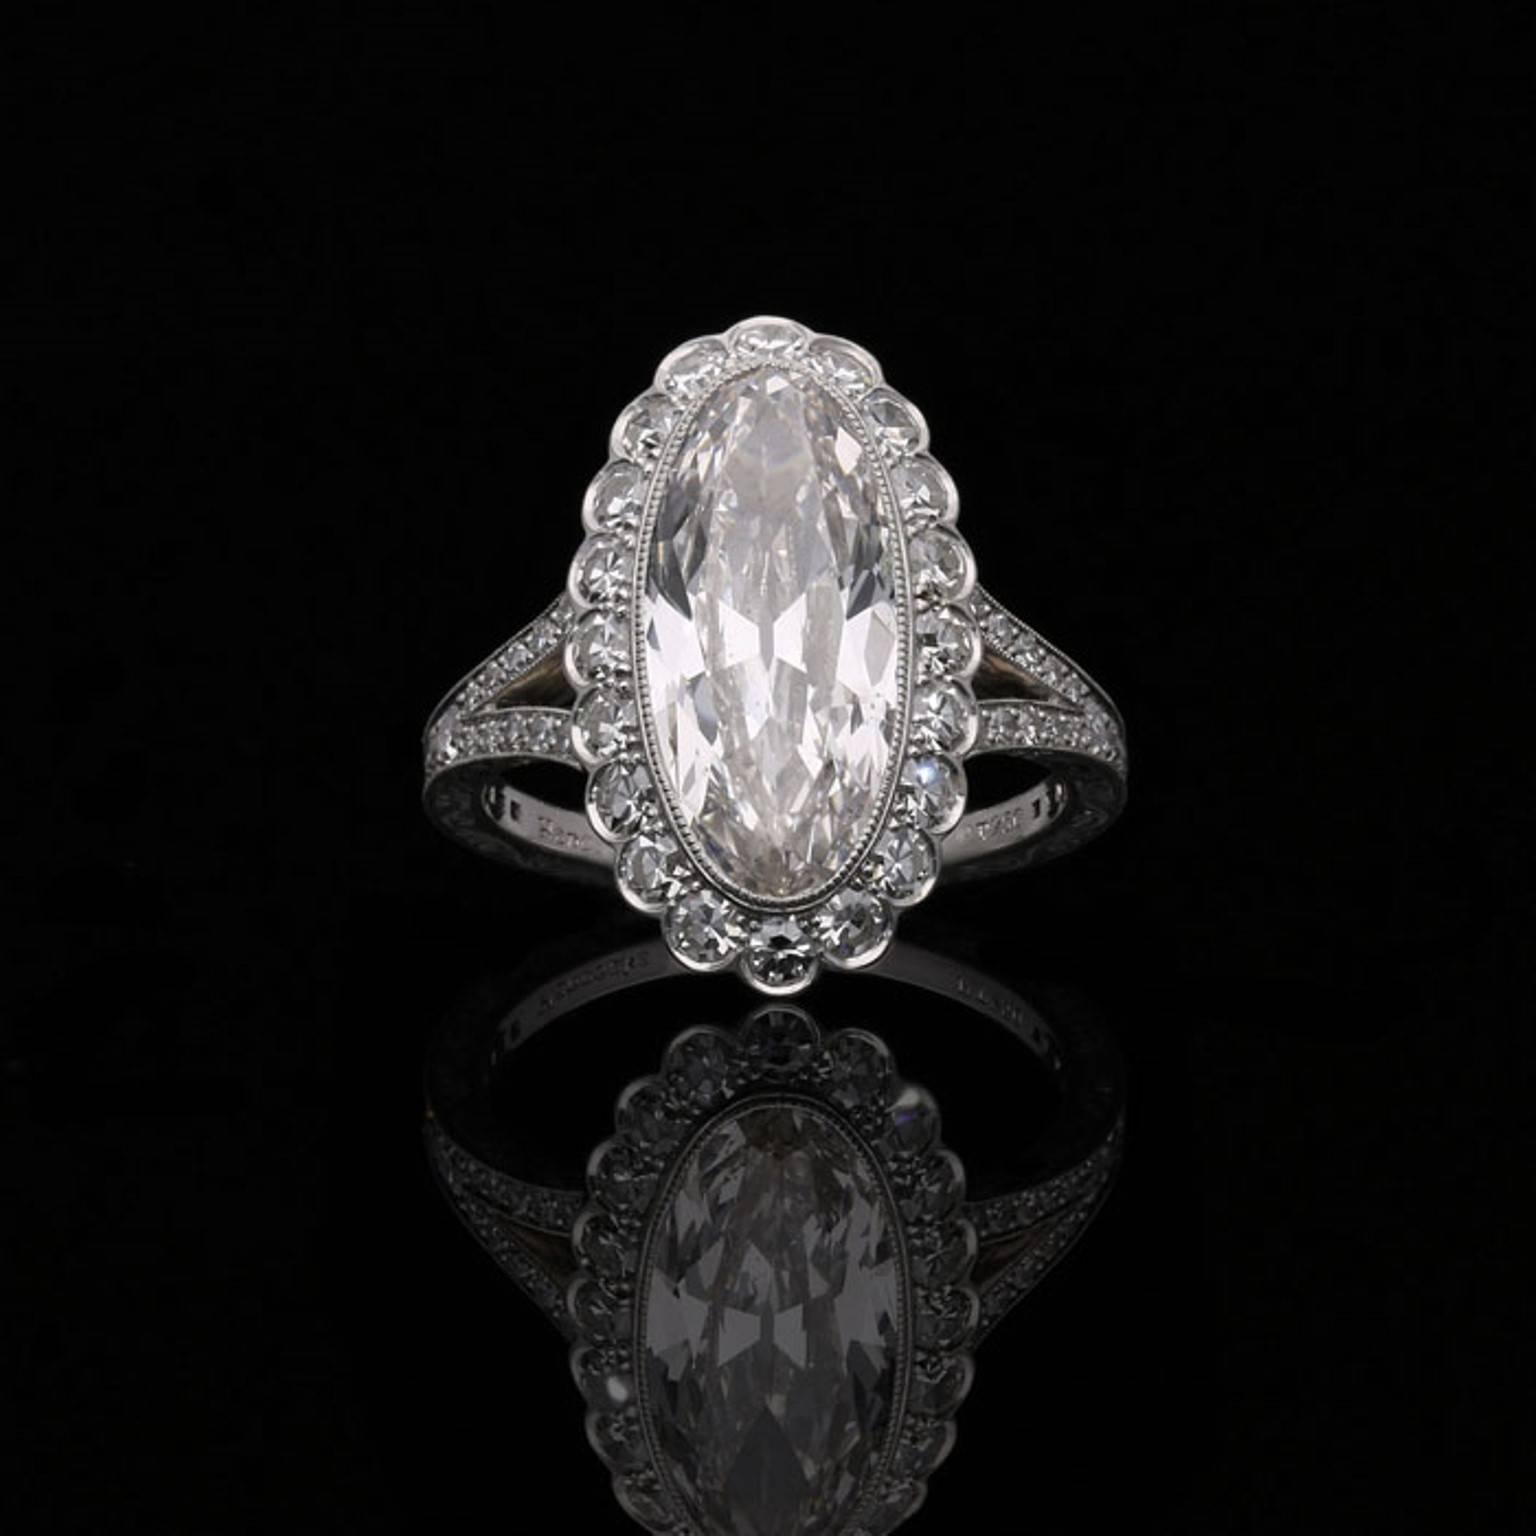 A stunning oval cluster diamond ring by Hancocks centred with a beautiful antique-cut moval shaped diamond weighing 3.35 carat and of H colour and VS2 clarity within a fine millegrained rub-over setting surrounded by a halo of single cut diamonds in